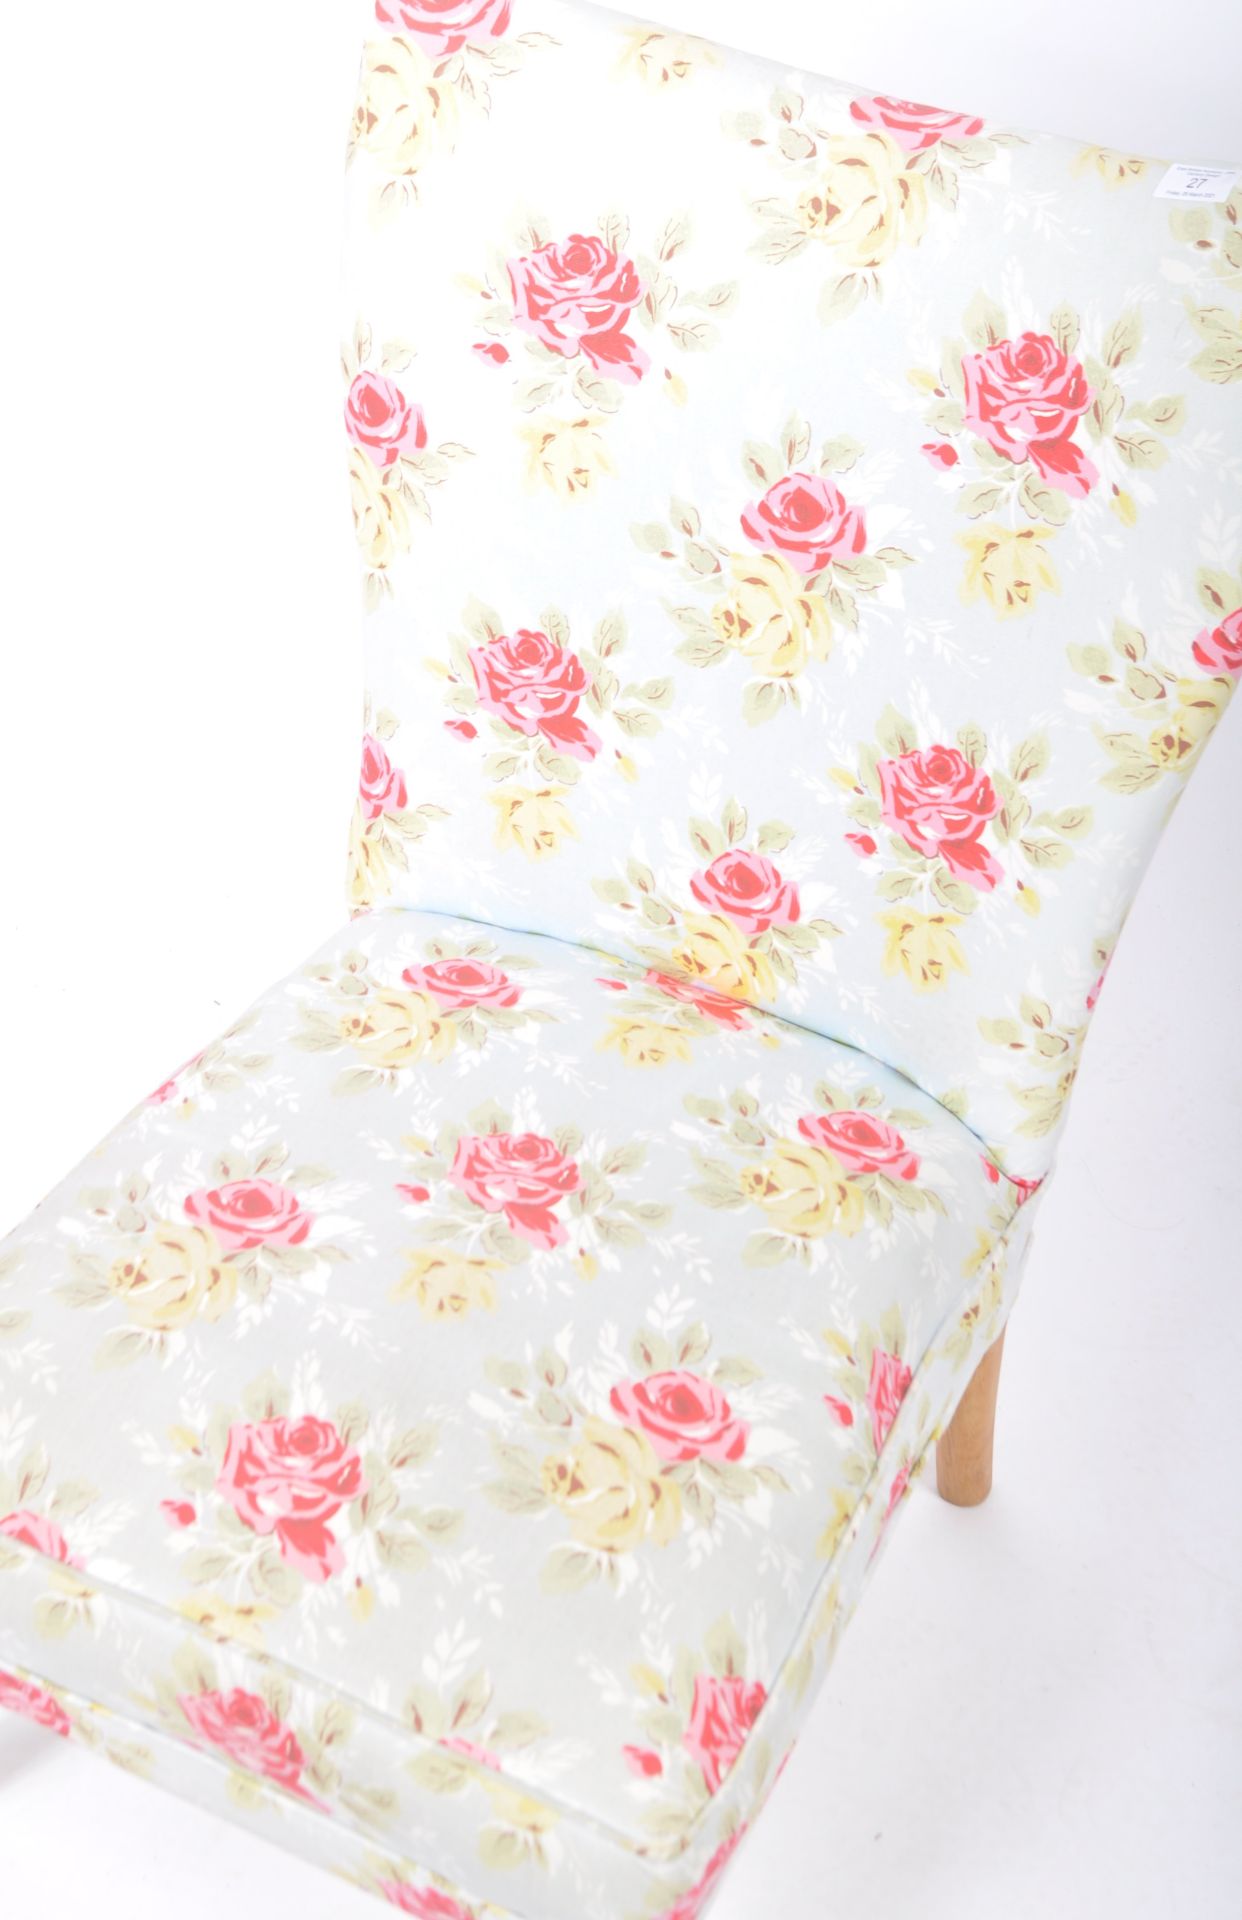 RETRO HOWARD KEITH MANNER LOW COCKTAIL CHAIR IN CATH KIDSTON UPHOLSTERY - Image 6 of 7